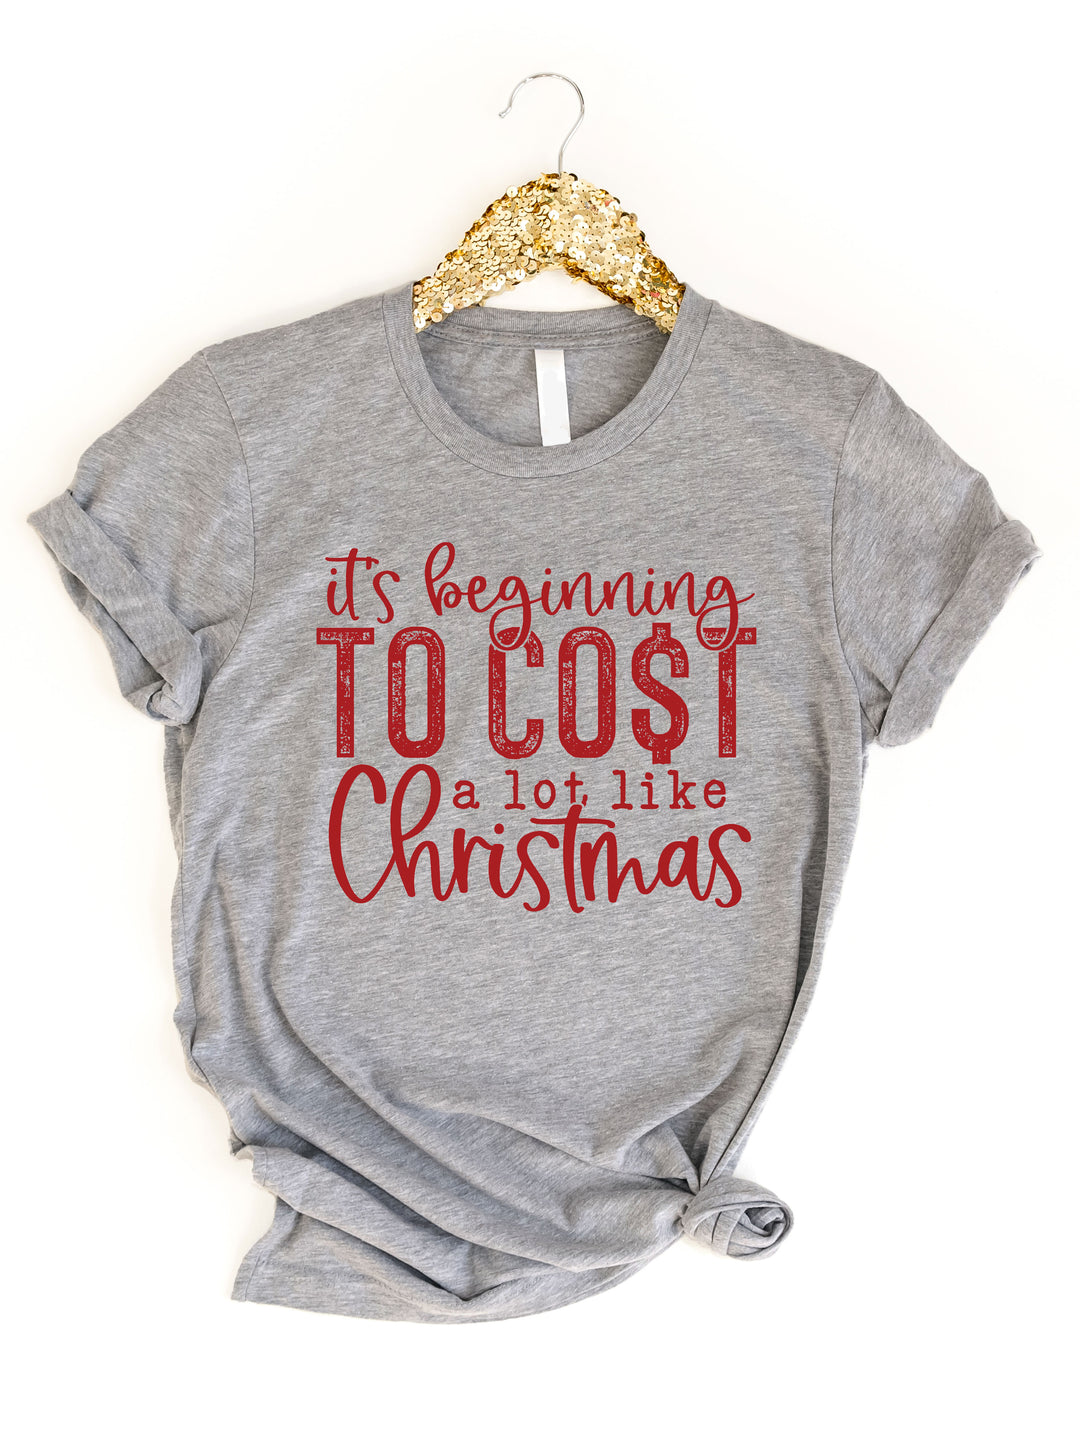 Cost A Lot Like Christmas Graphic Tee